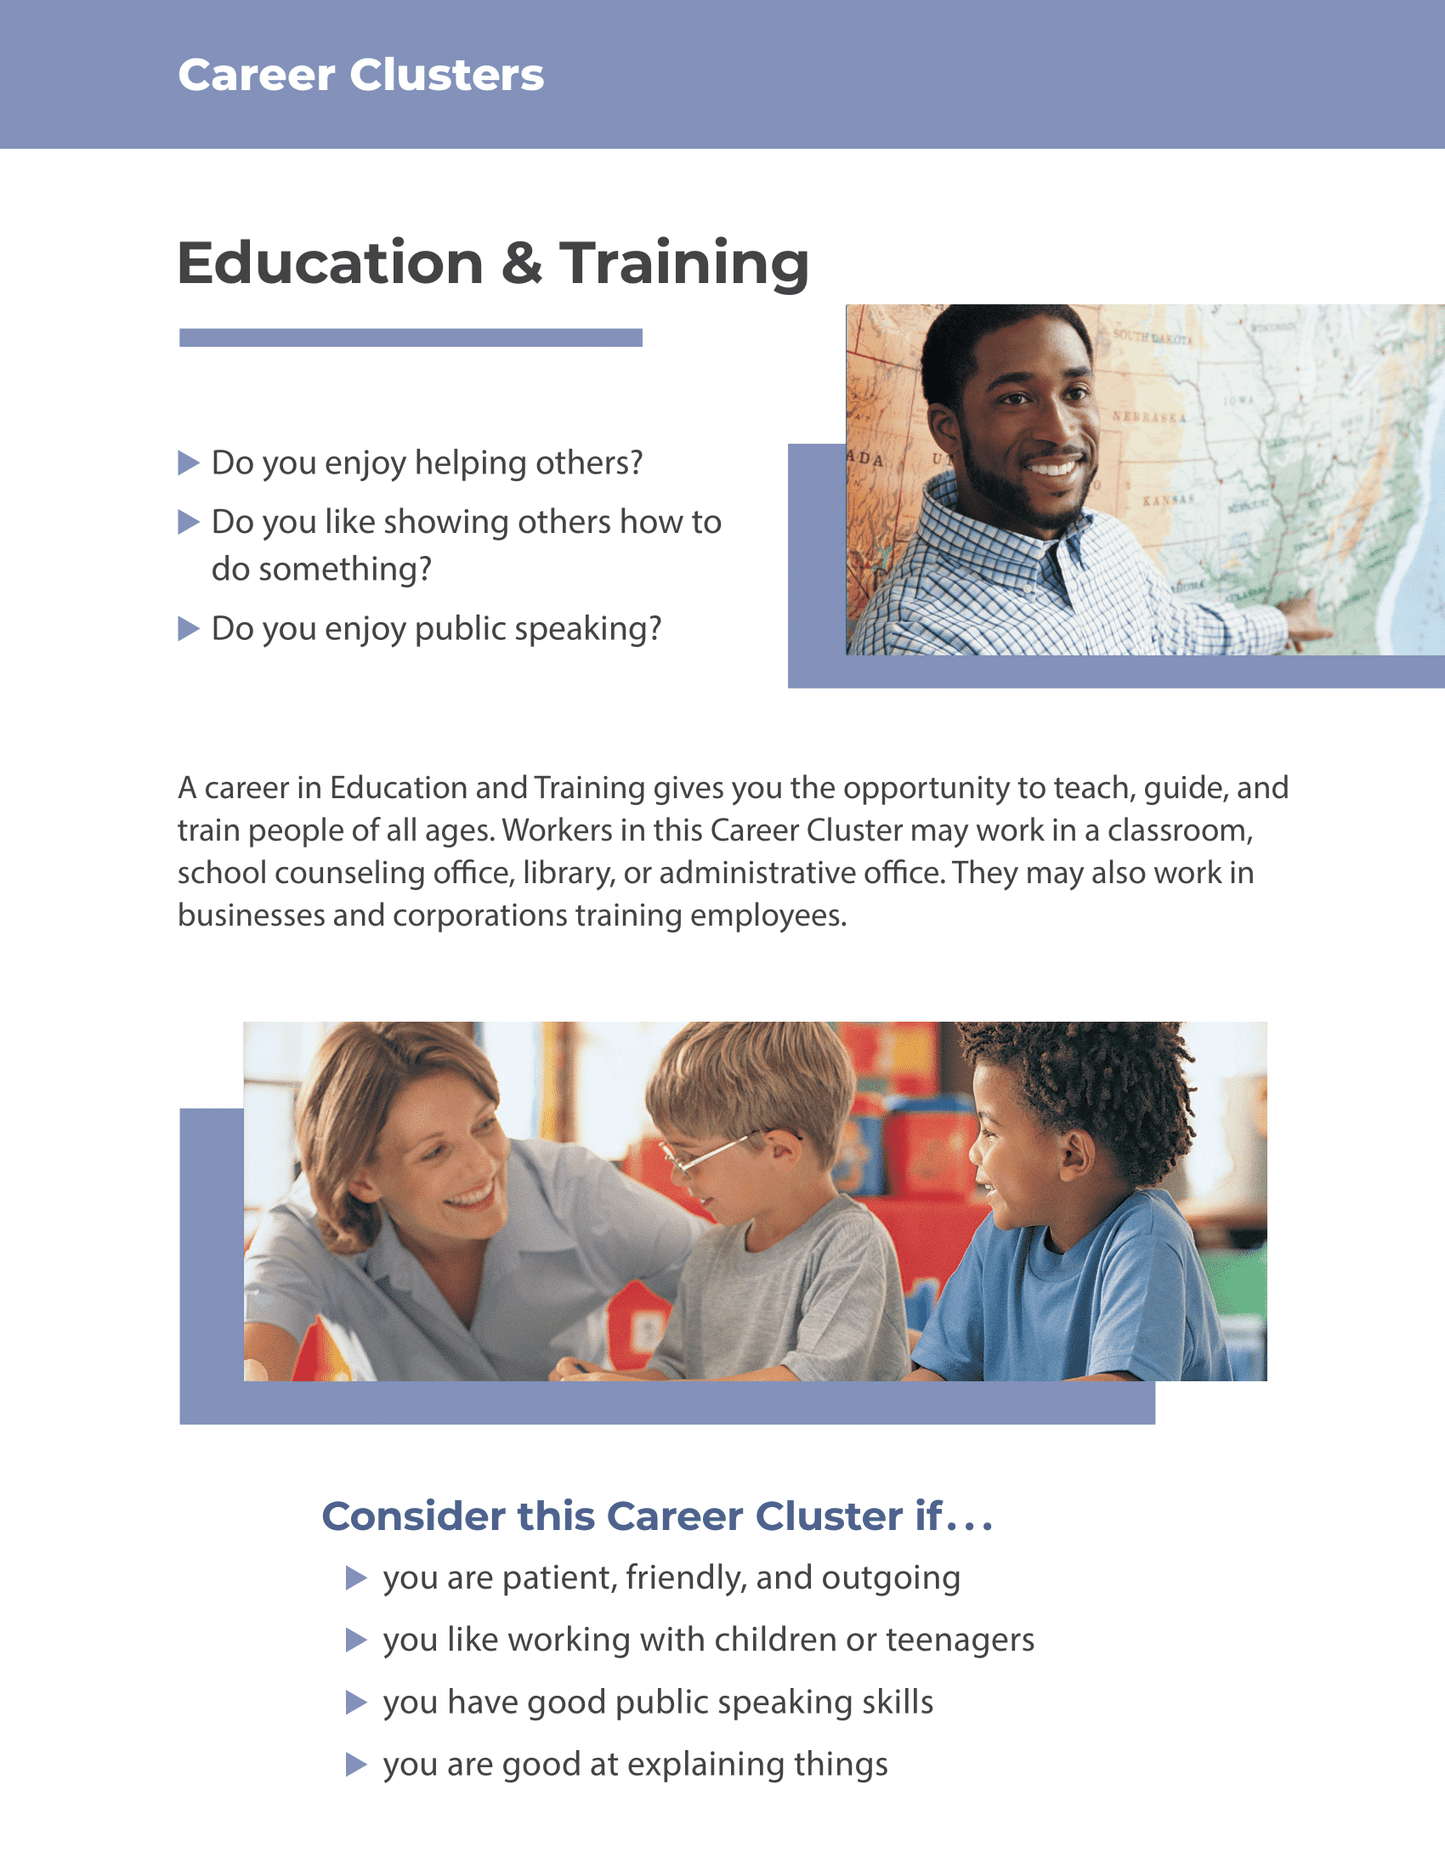 Career Clusters - Education and Training